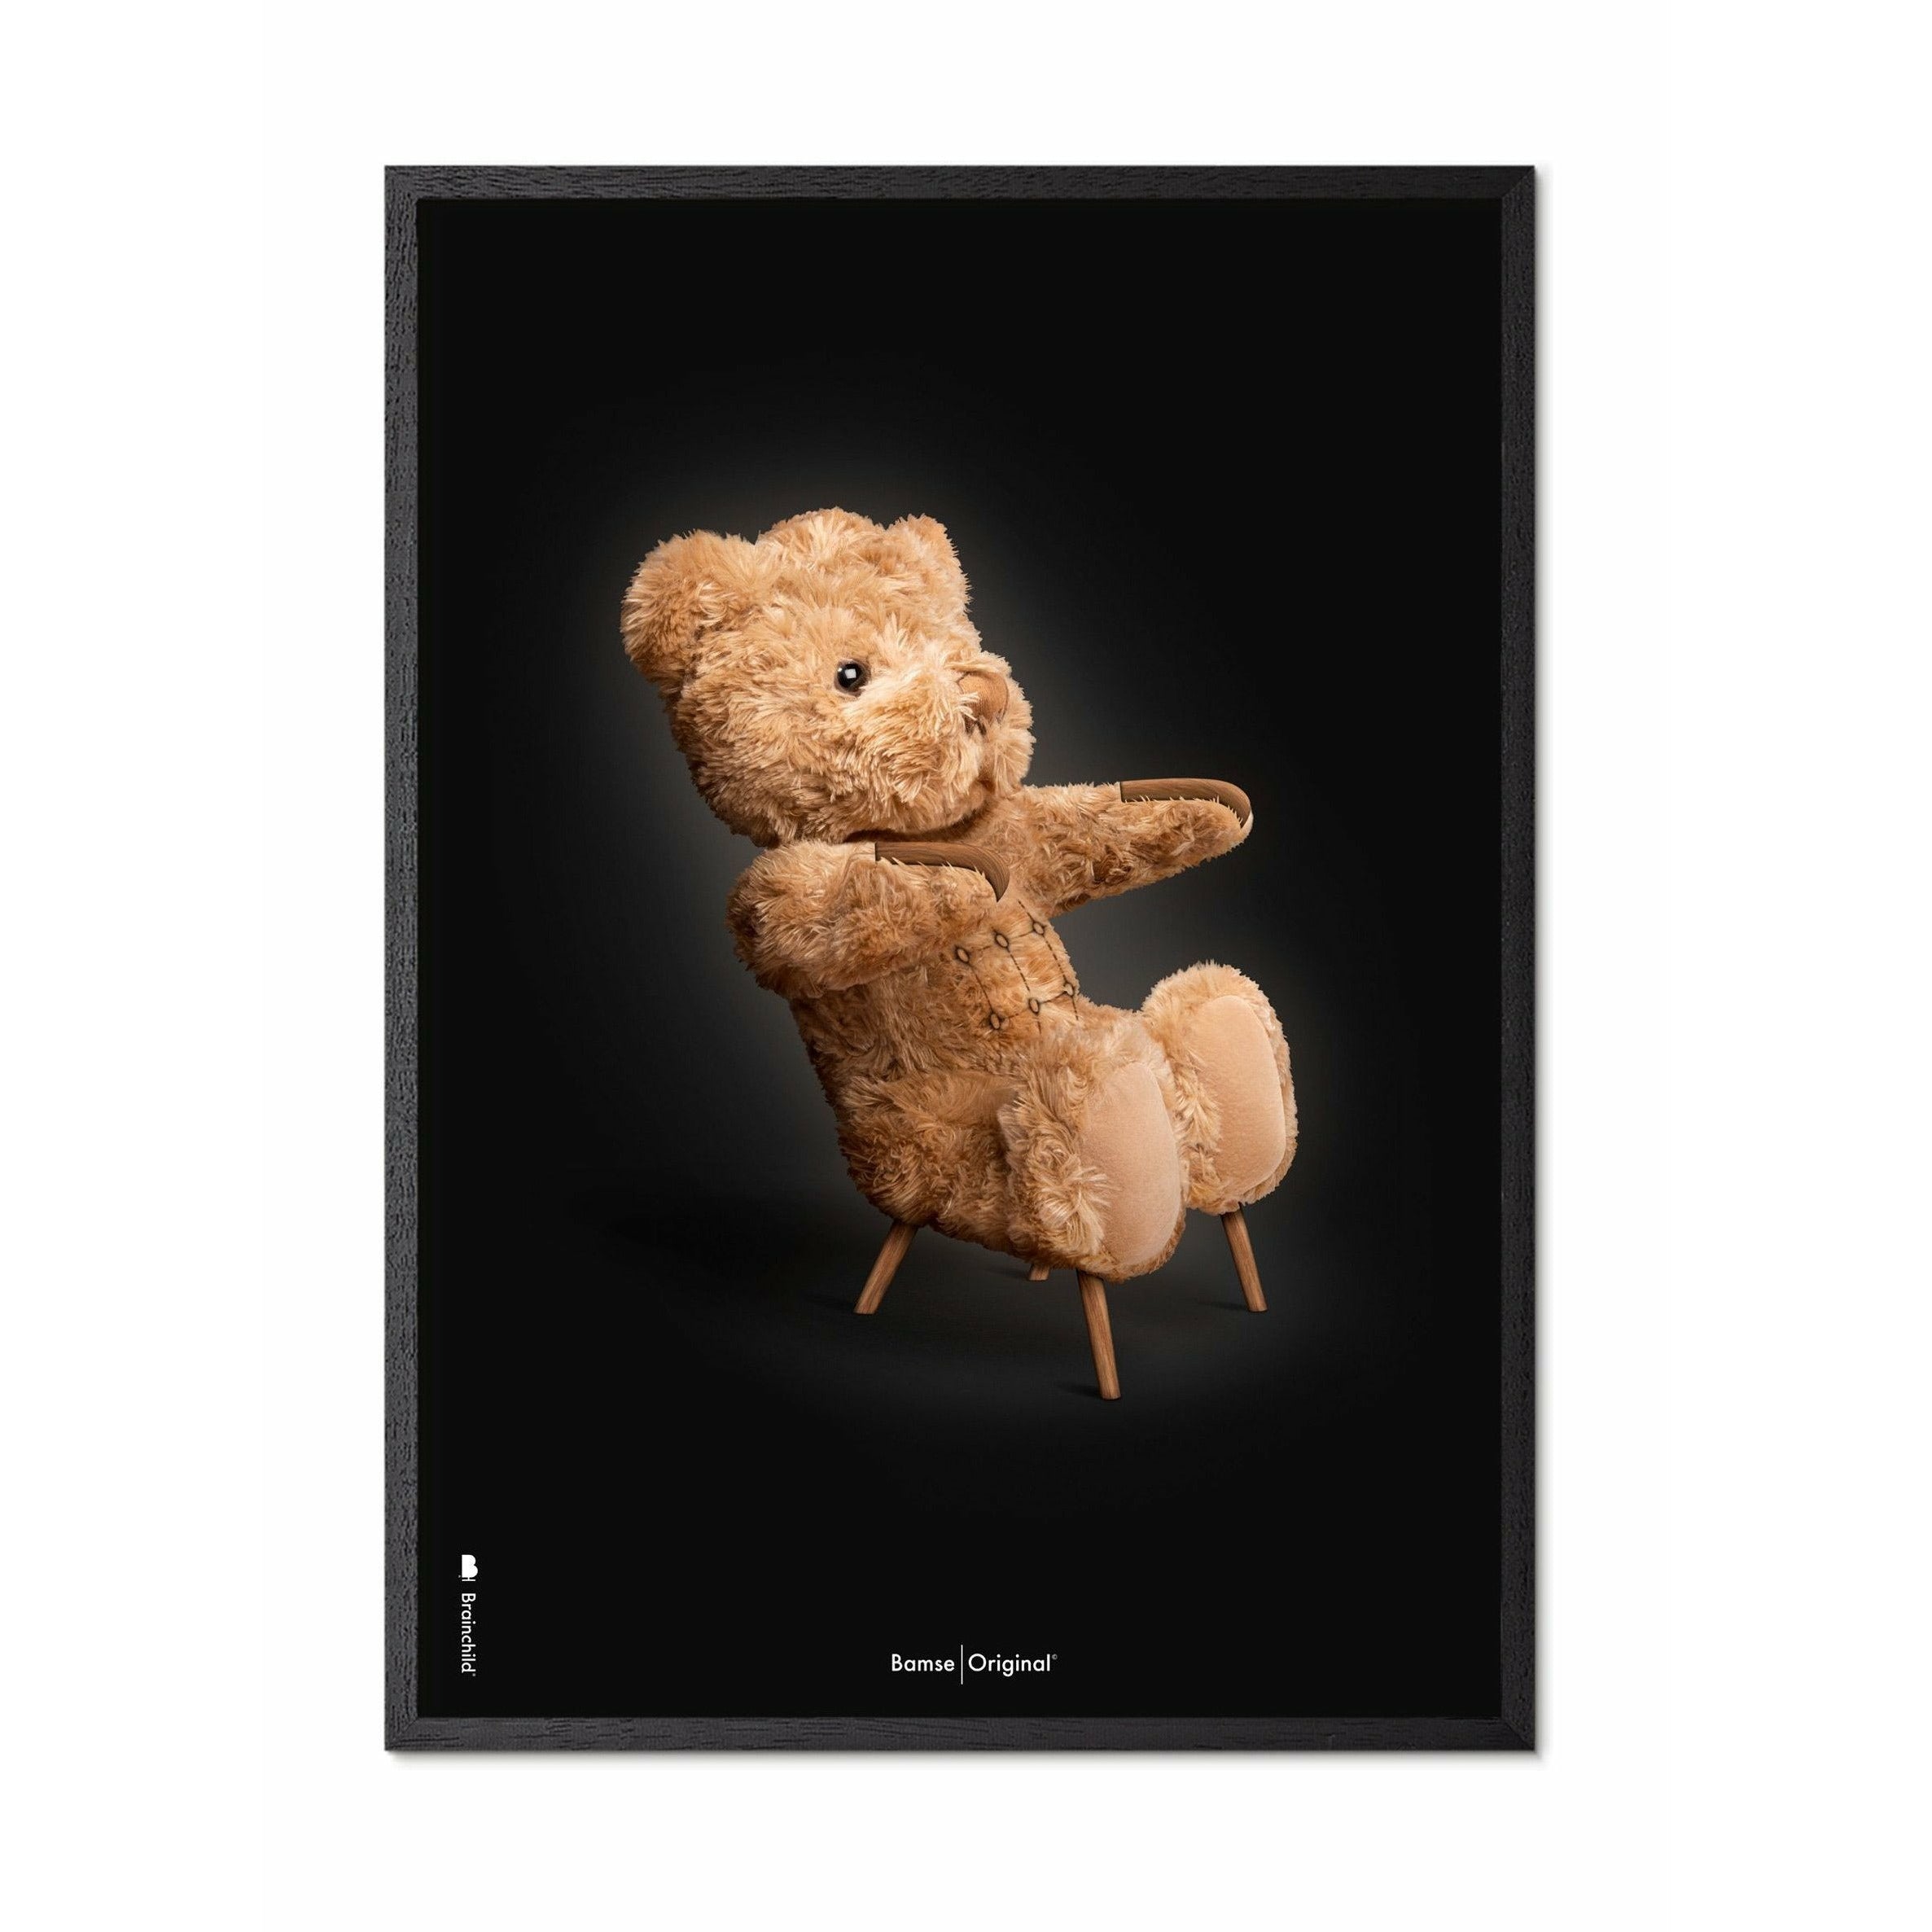 Brainchild Teddy Bear Classic Poster, Frame In Black Lacquered Wood A5, Black Background